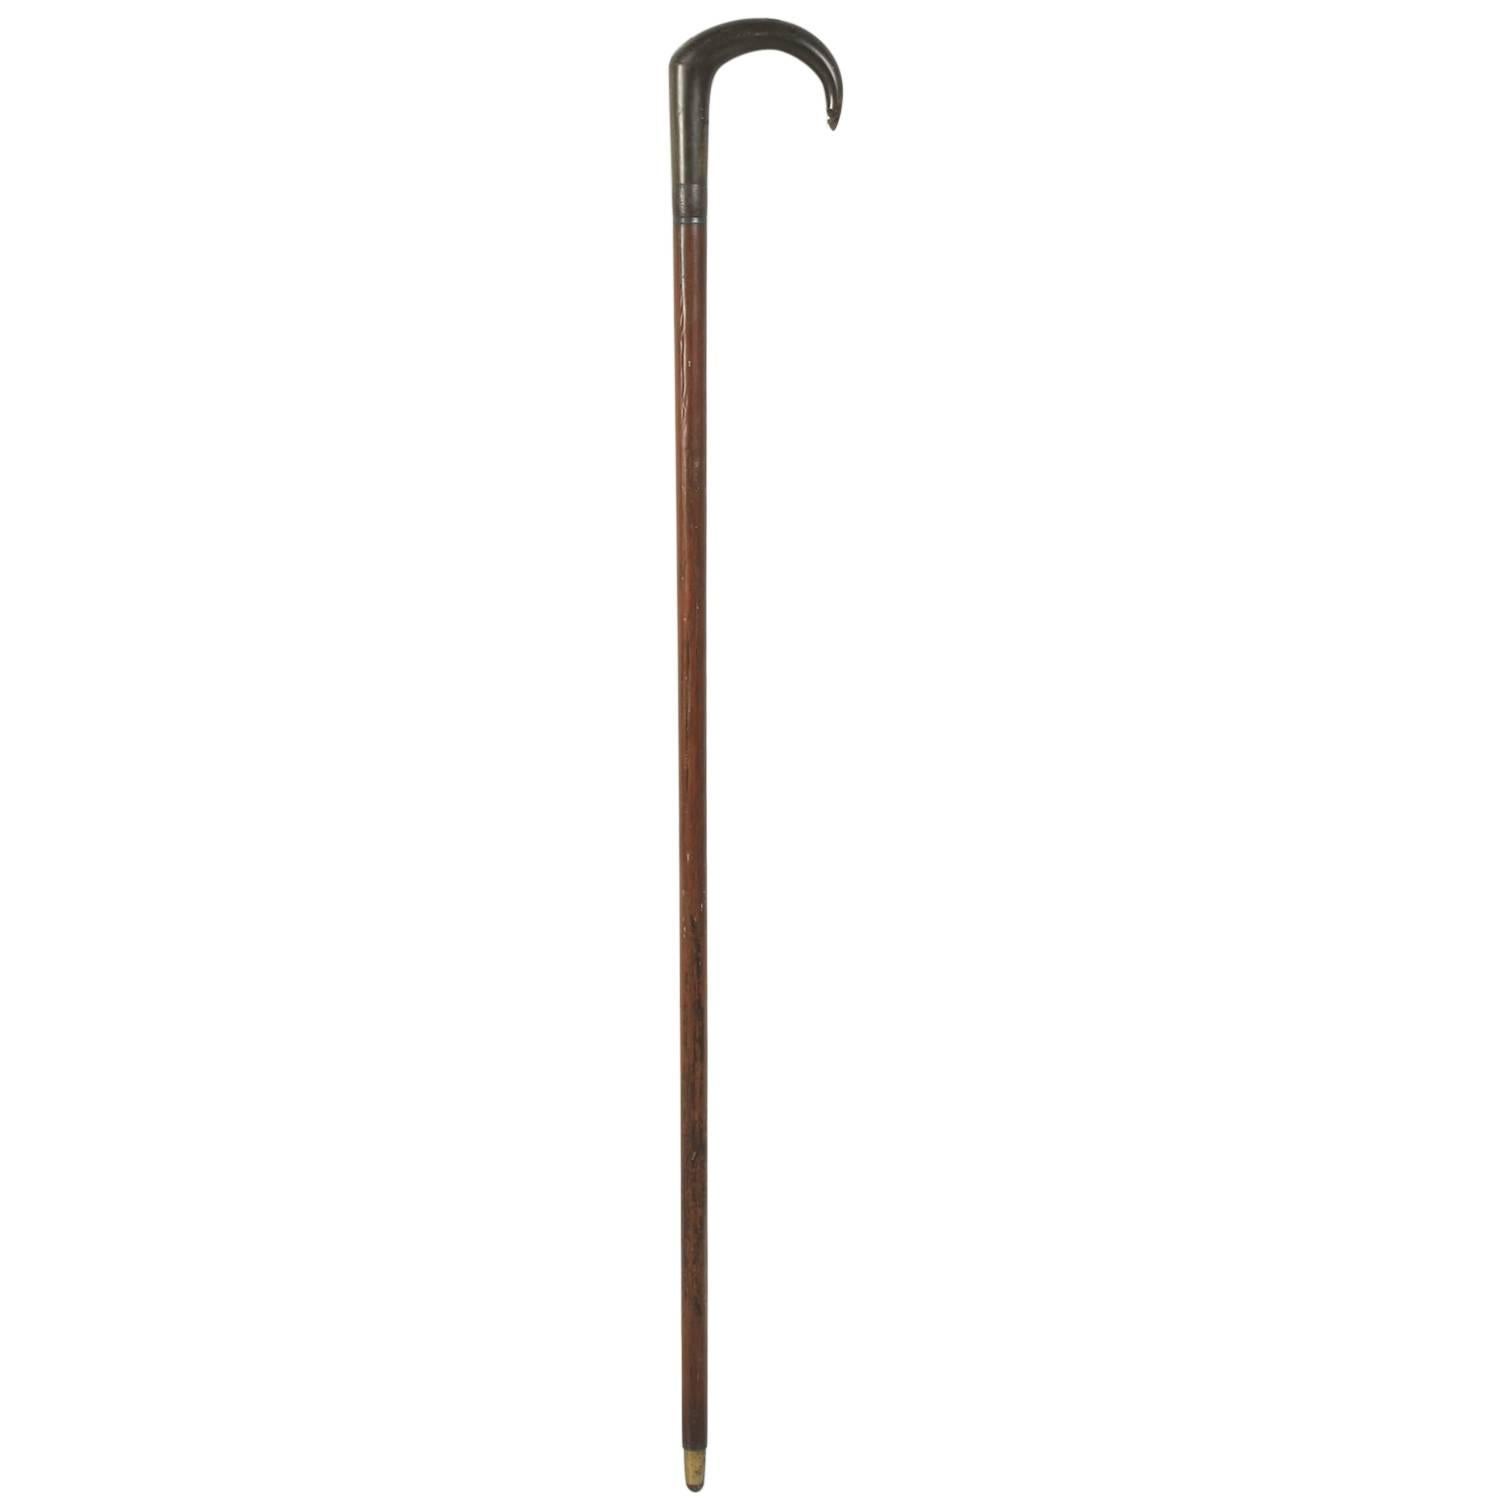 Antique French Horn Handle Walking Stick, or Cane That Was Once a Gun